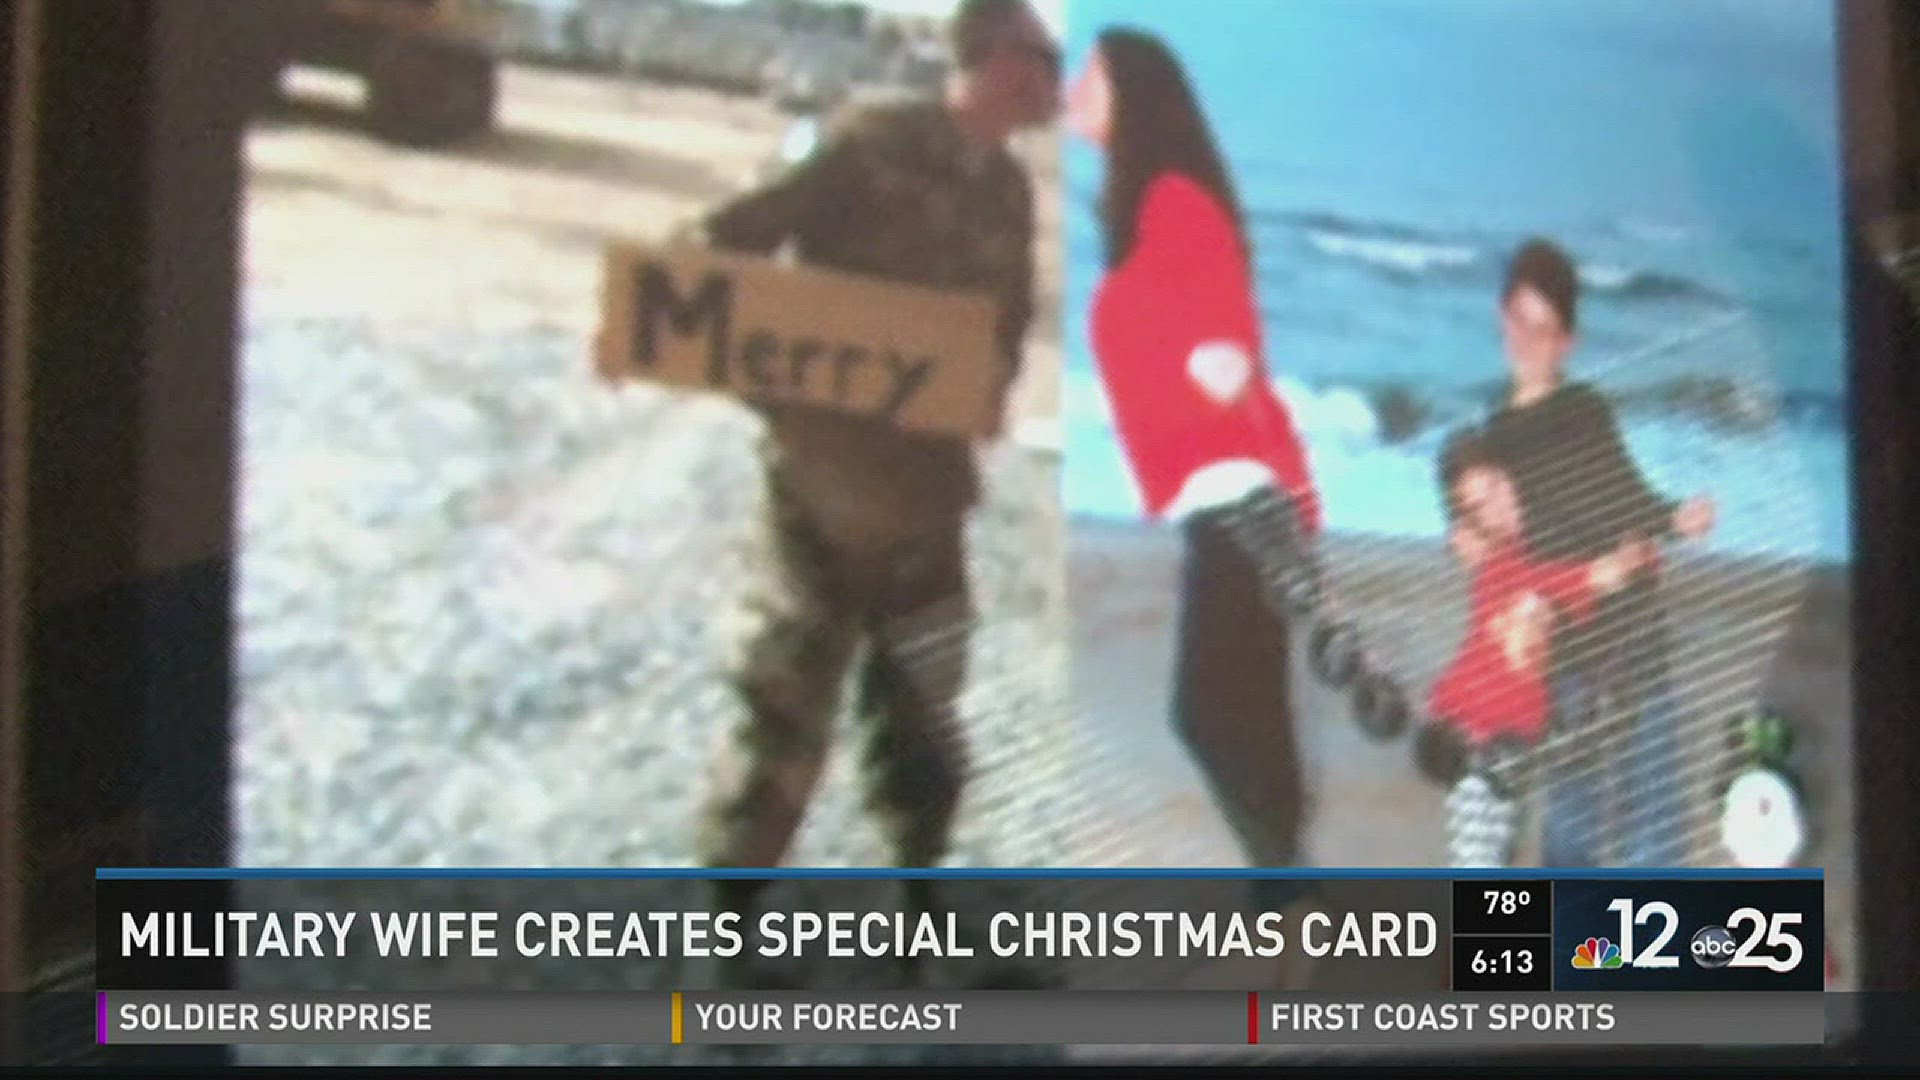 Military wife creates special Christmas card